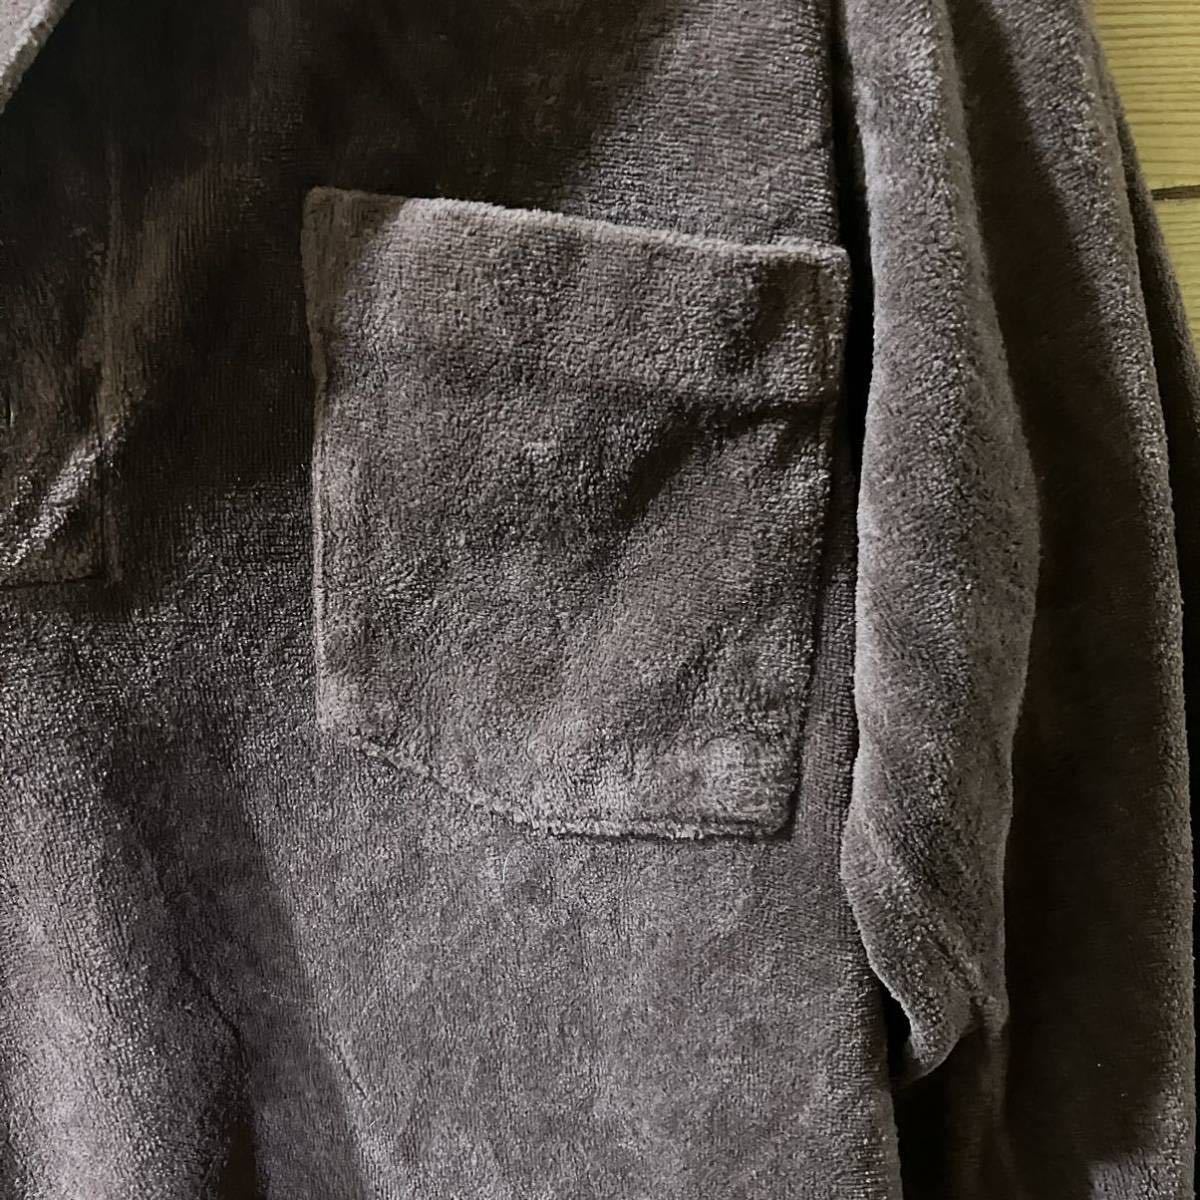 70s〜80s USED CAREER CLUB VELOUR/PILE SHIRTS Made In USA 70's〜80's 中古 ベロア/パイル シャツ アメリカ製 Mサイズ 送料無料